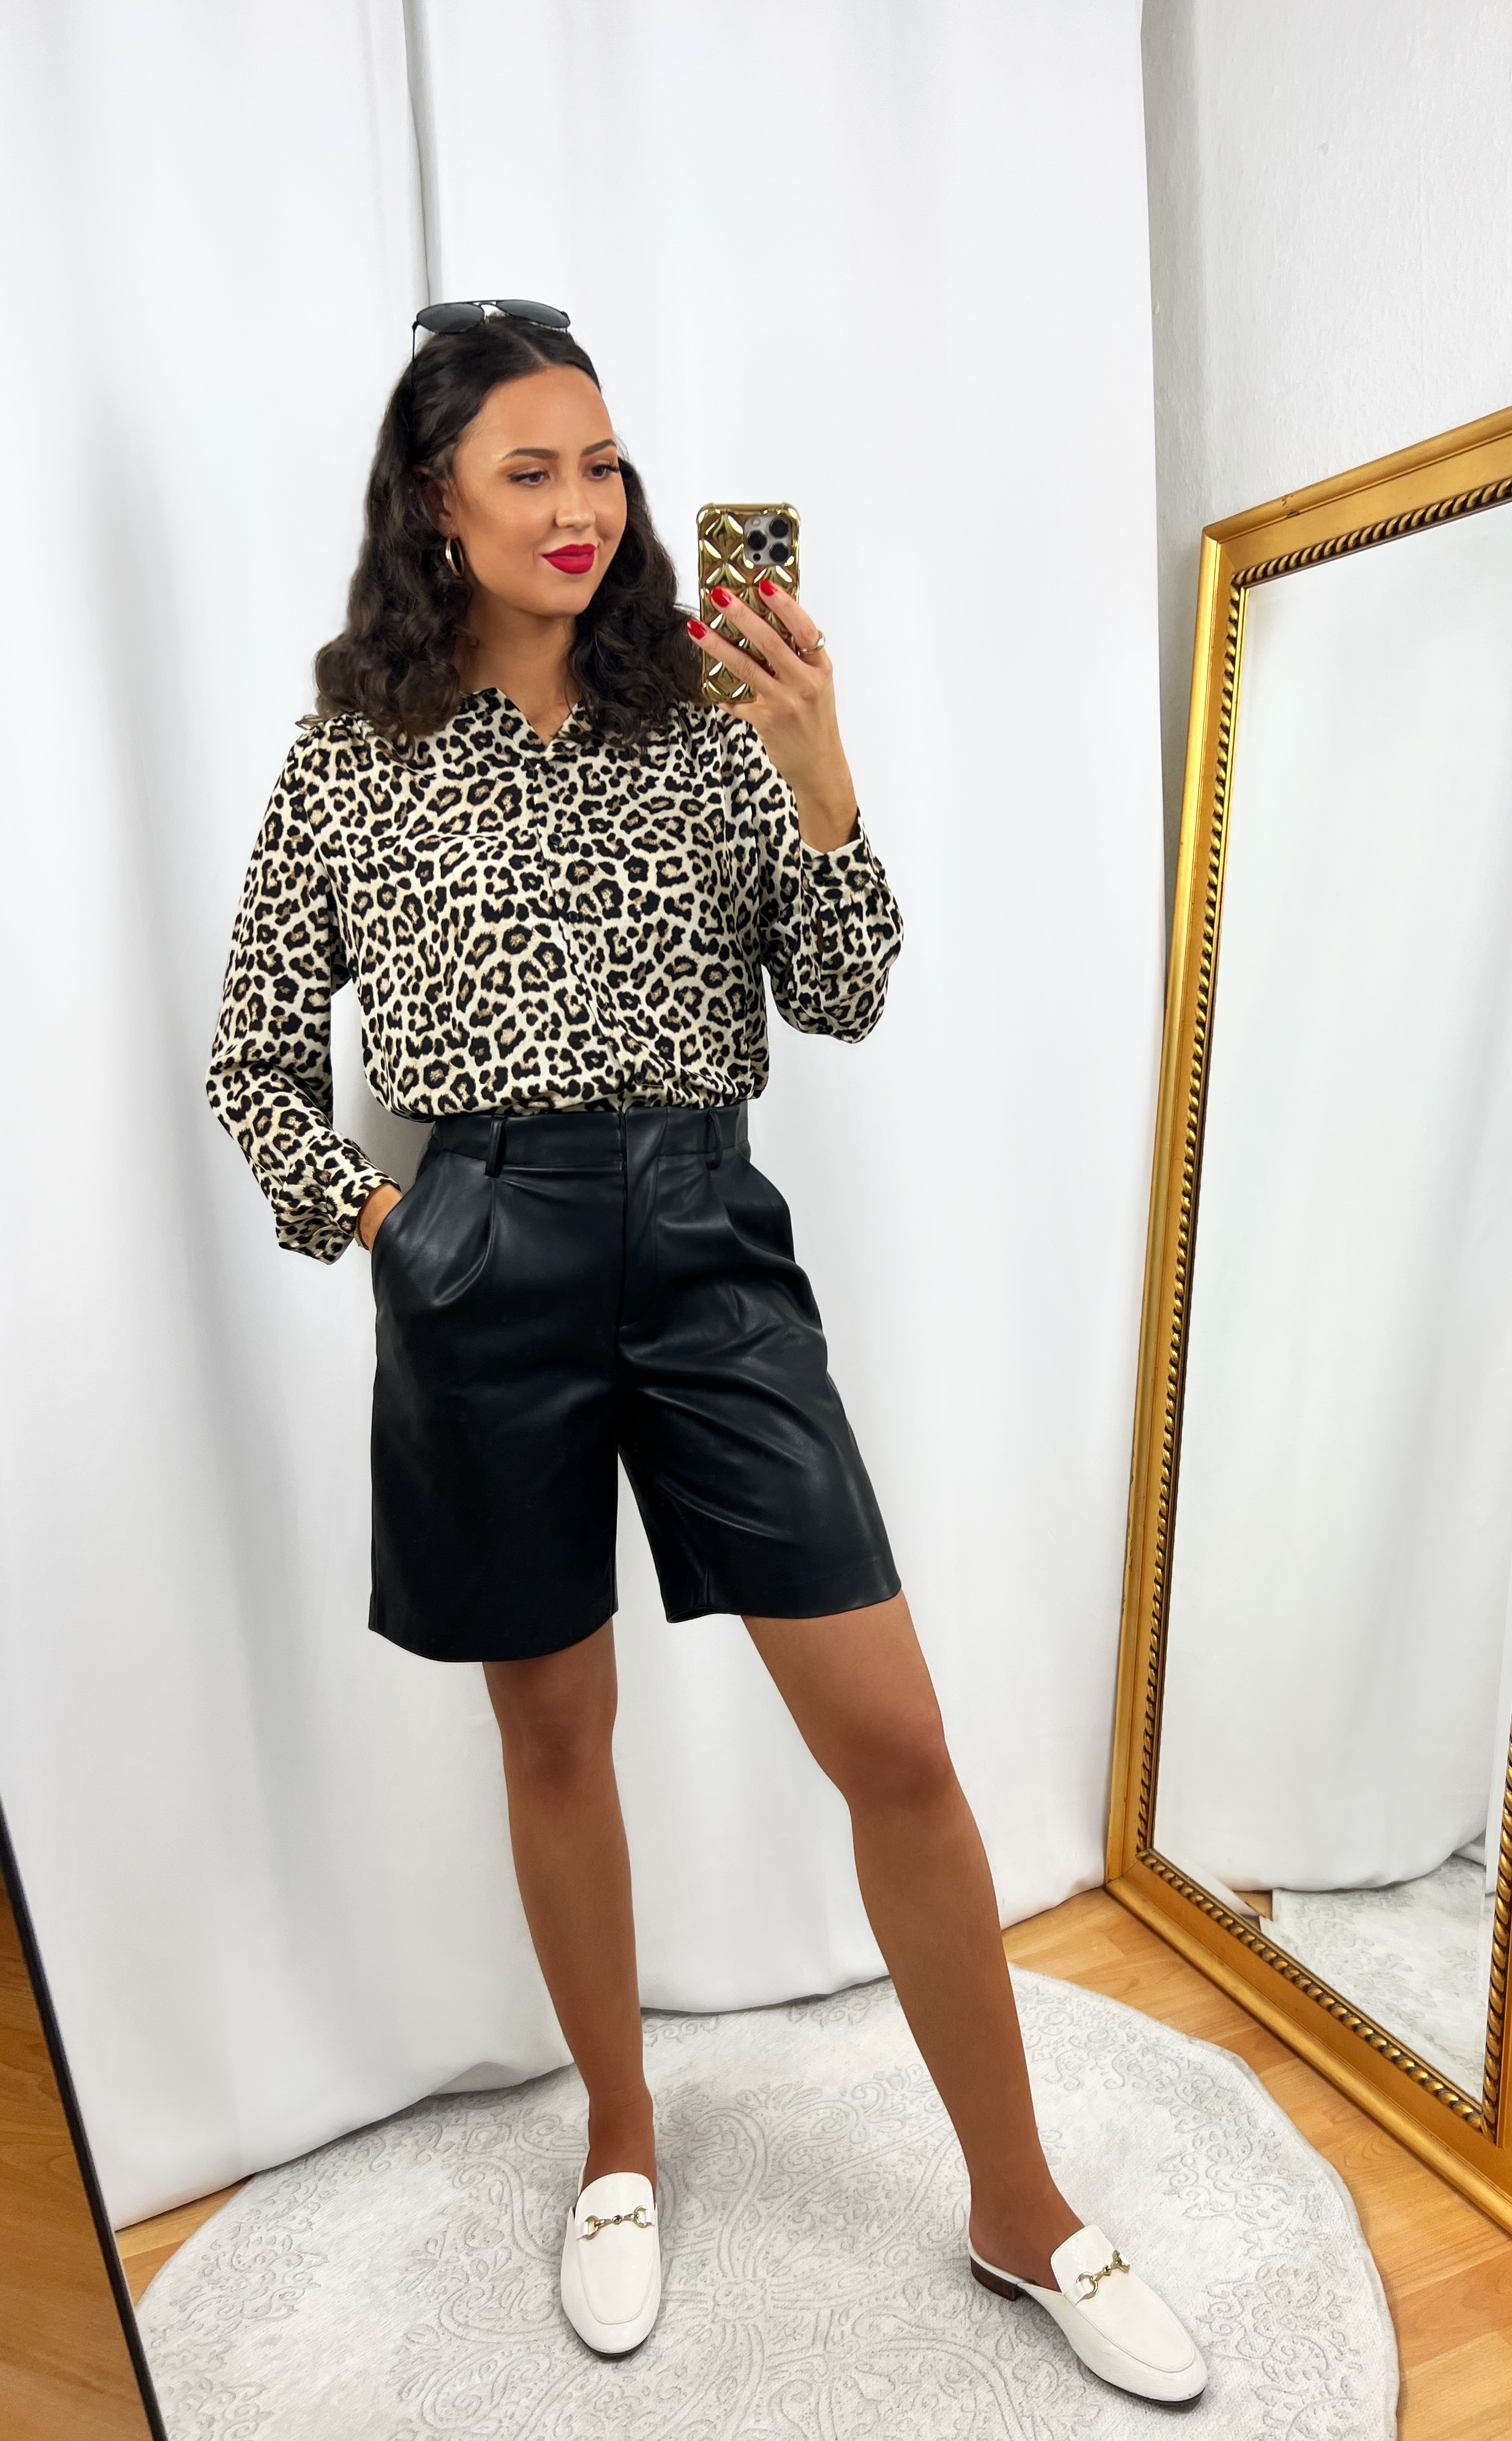 Leopard Blouse Outfit with Black Leather Shorts